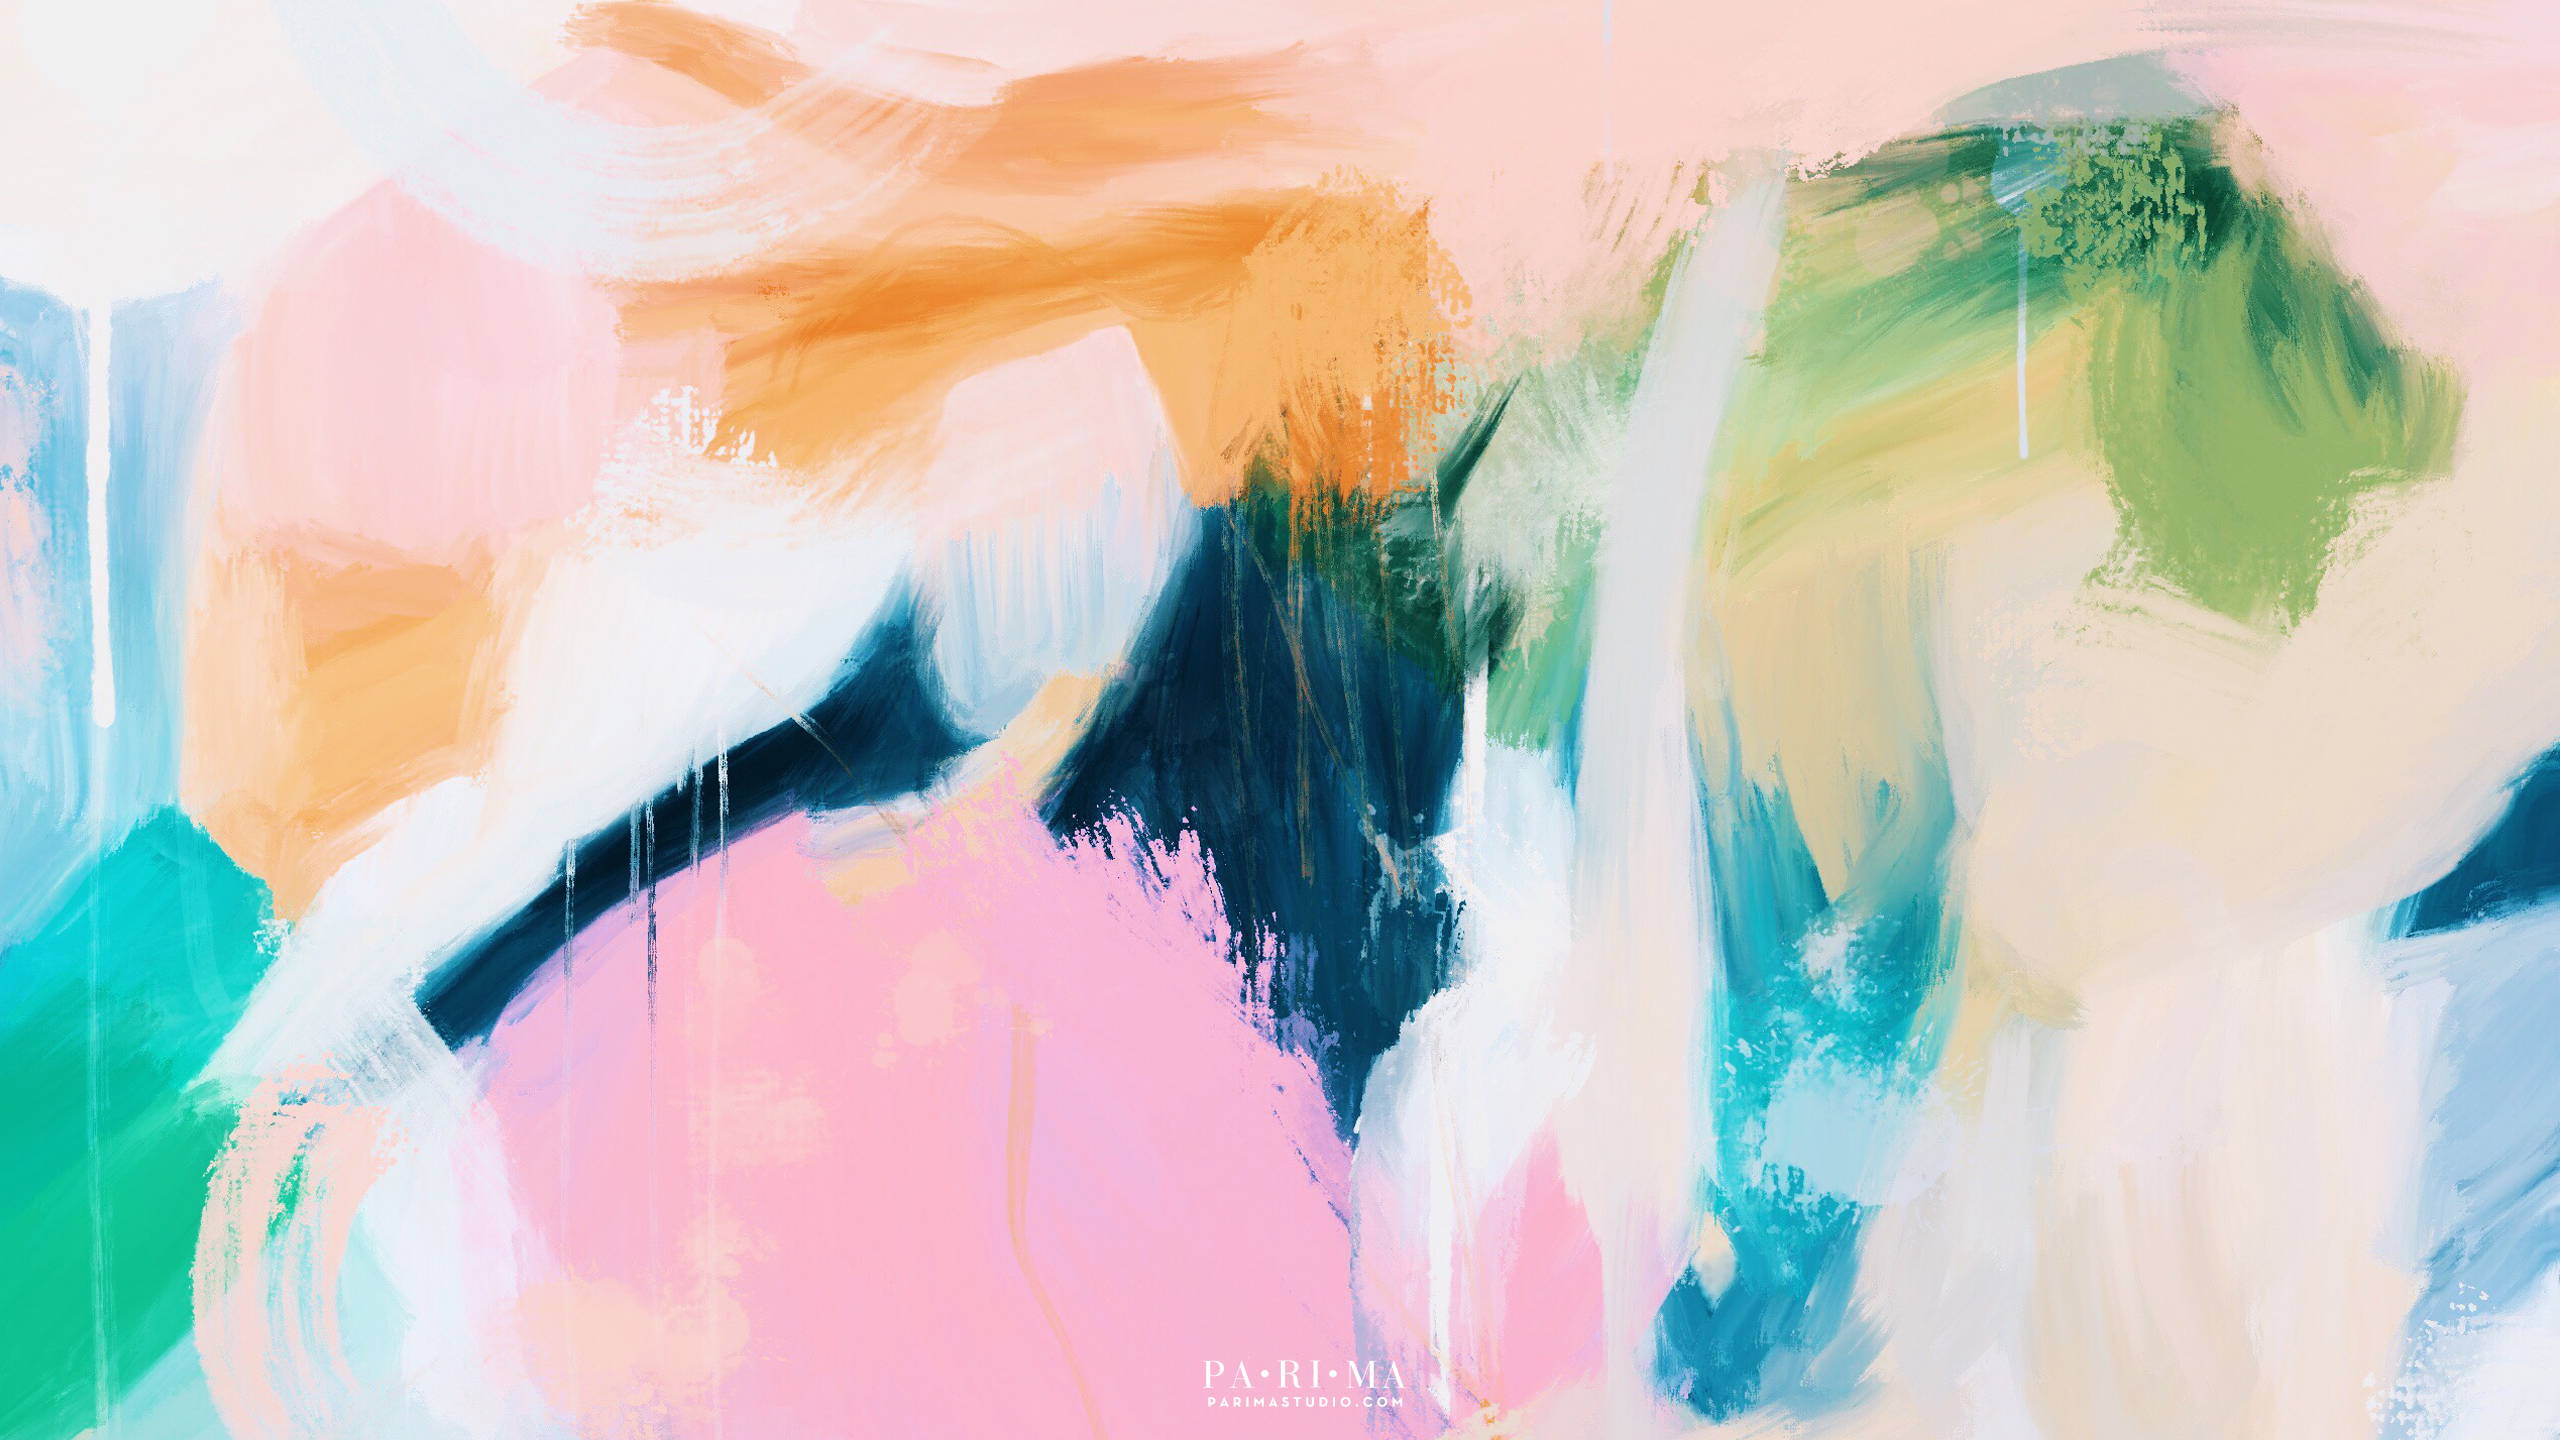 Free wallpaper download via Parima Studio #art . Add it to all of your tech devices!